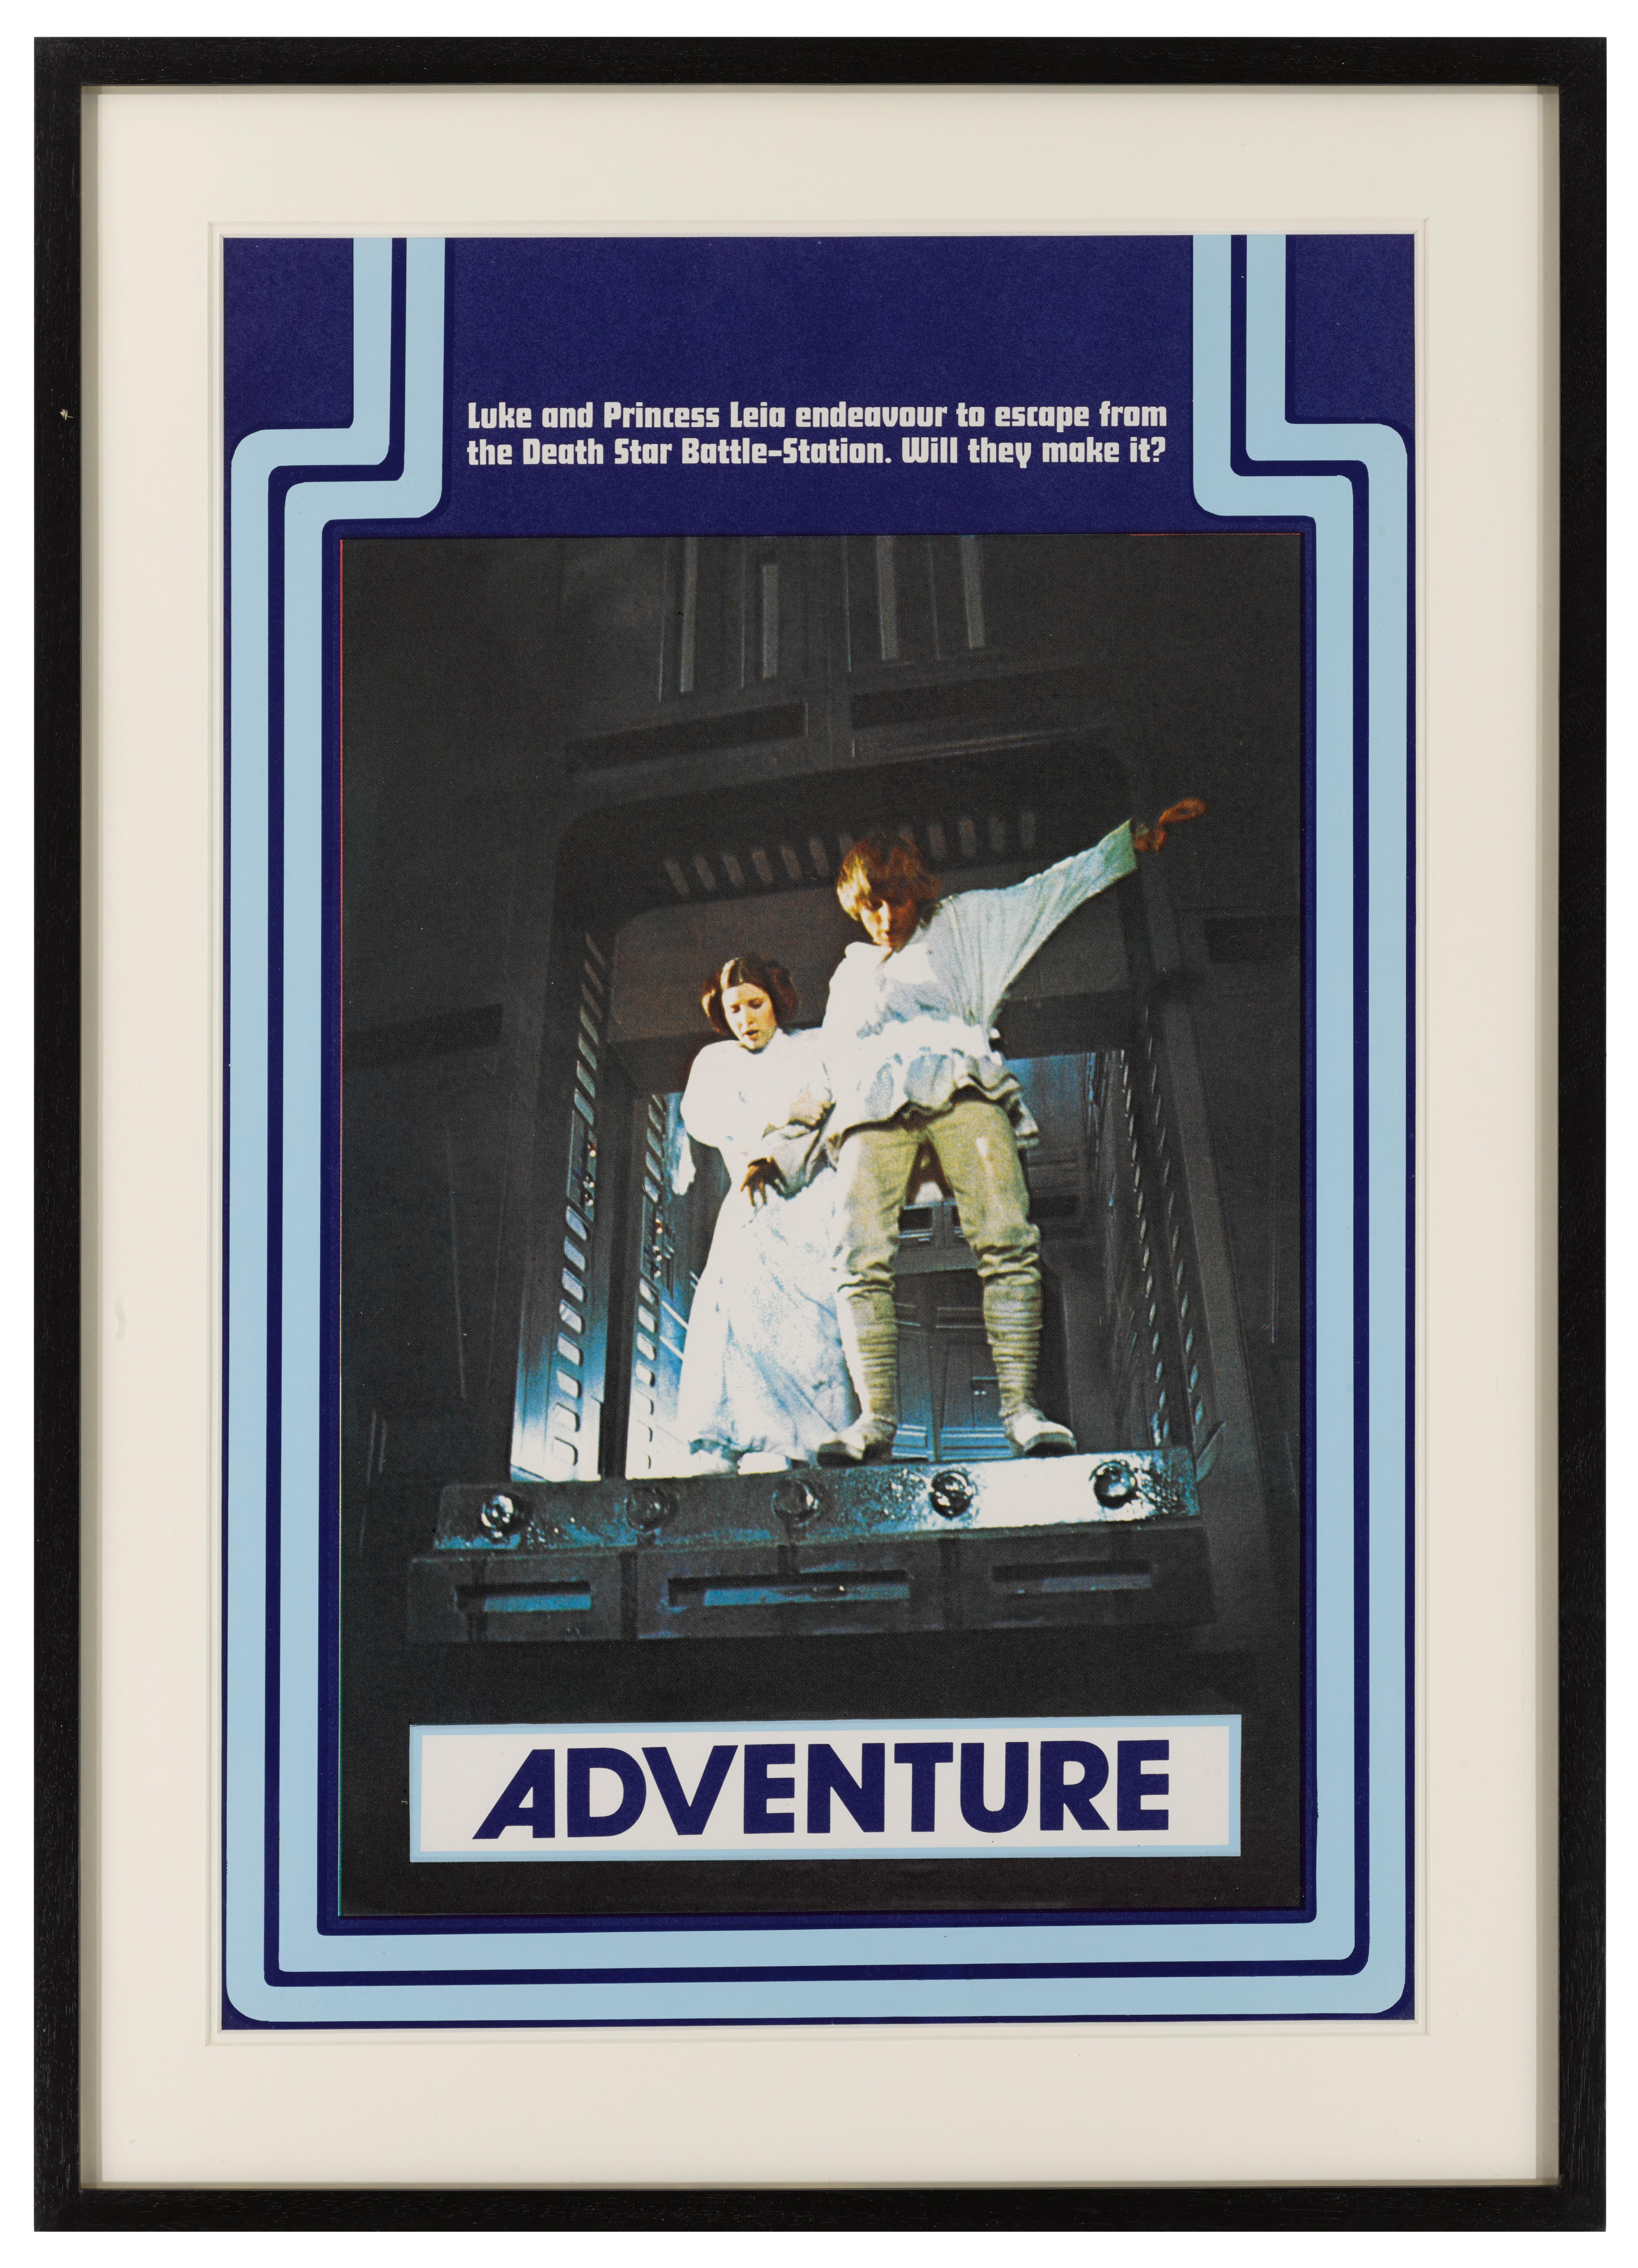 Original British film posters for Star Wars 1977.
The film was directed by George Lucas and starred Mark Hamill, Harrison Ford, Carrie Fisher.
These four Marler Haley posters were produced exclusively for Odeon cinemas, and designed to be used as